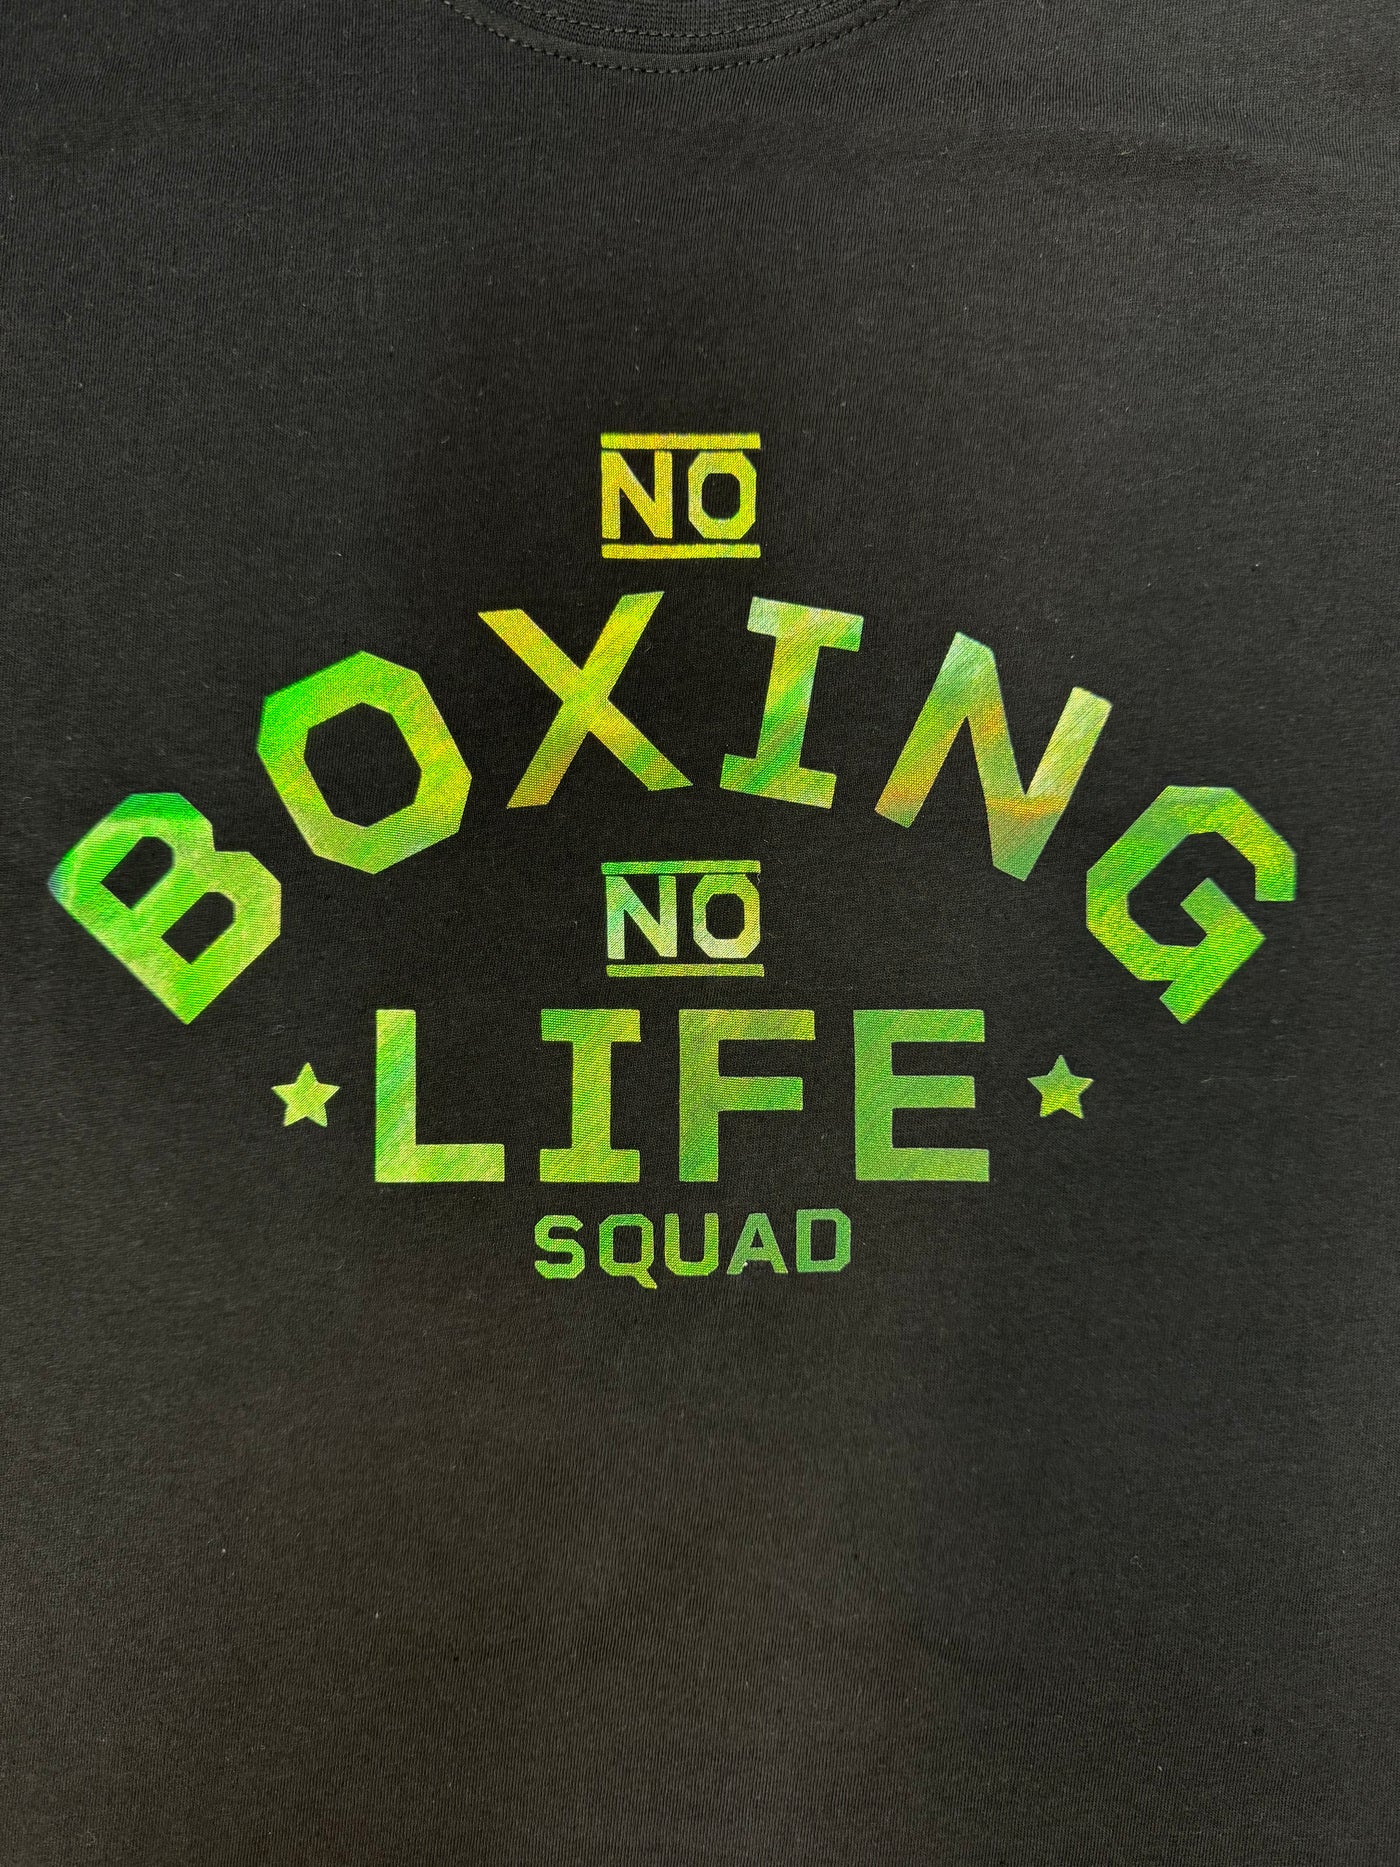 OFFICIAL NO BOXING NO LIFE - T Shirt Black with Neon shine